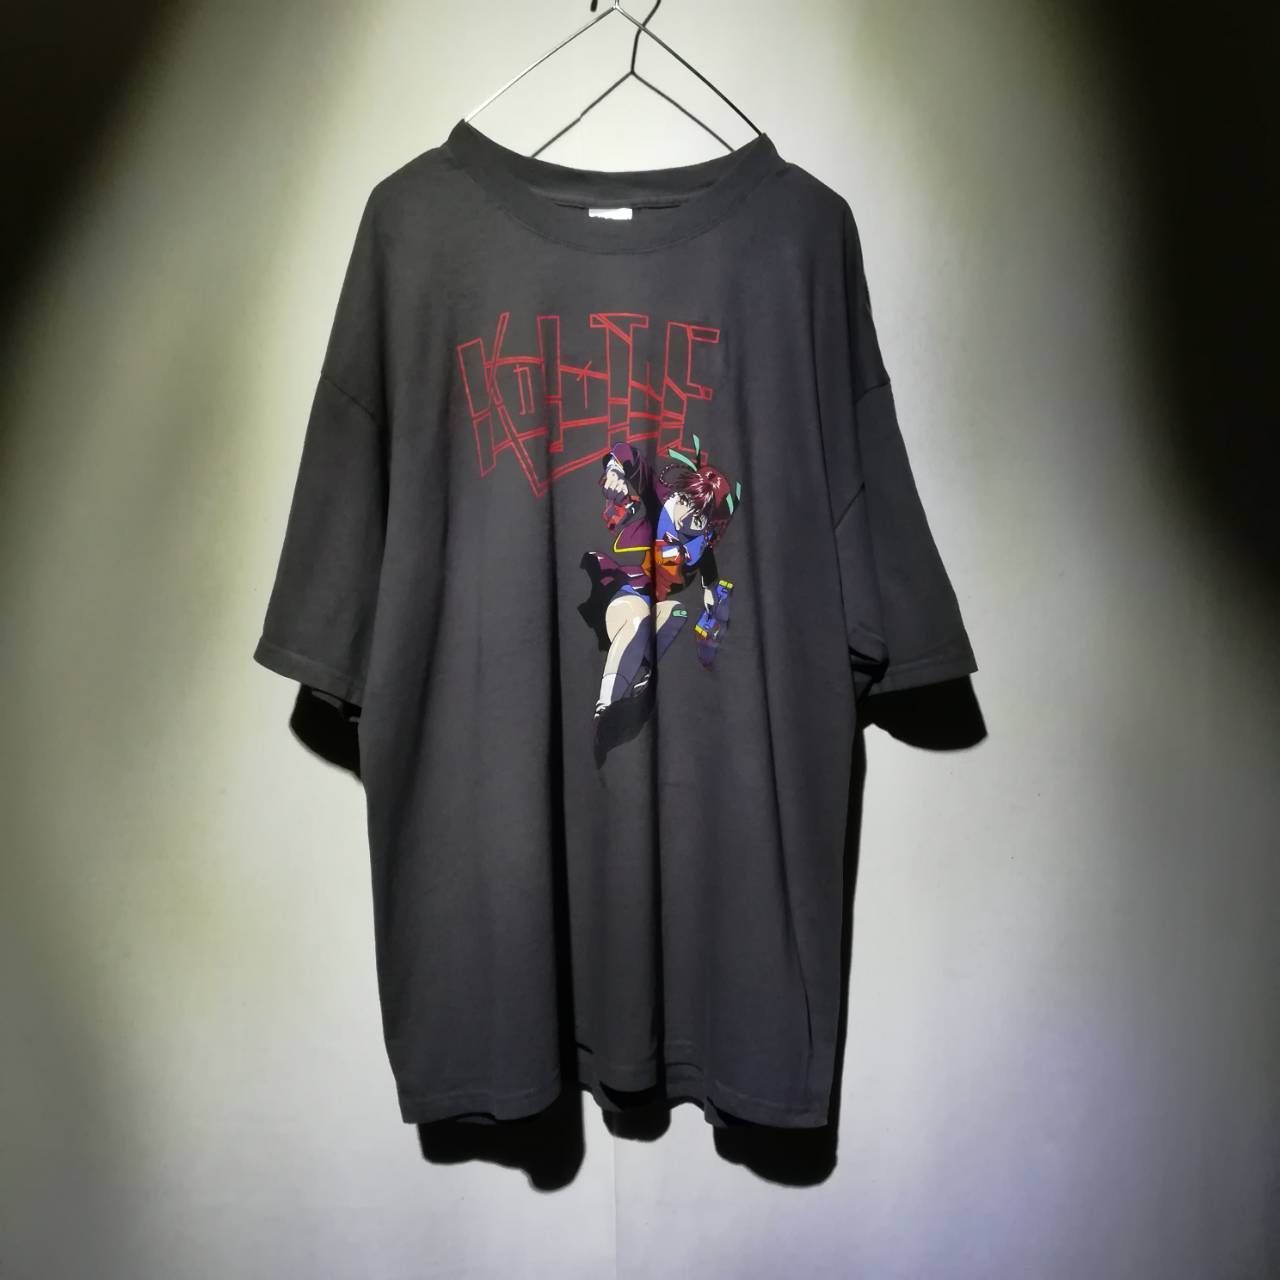 【SPECIAL】デッドストック 90s A KITE Tシャツ 梅津泰臣